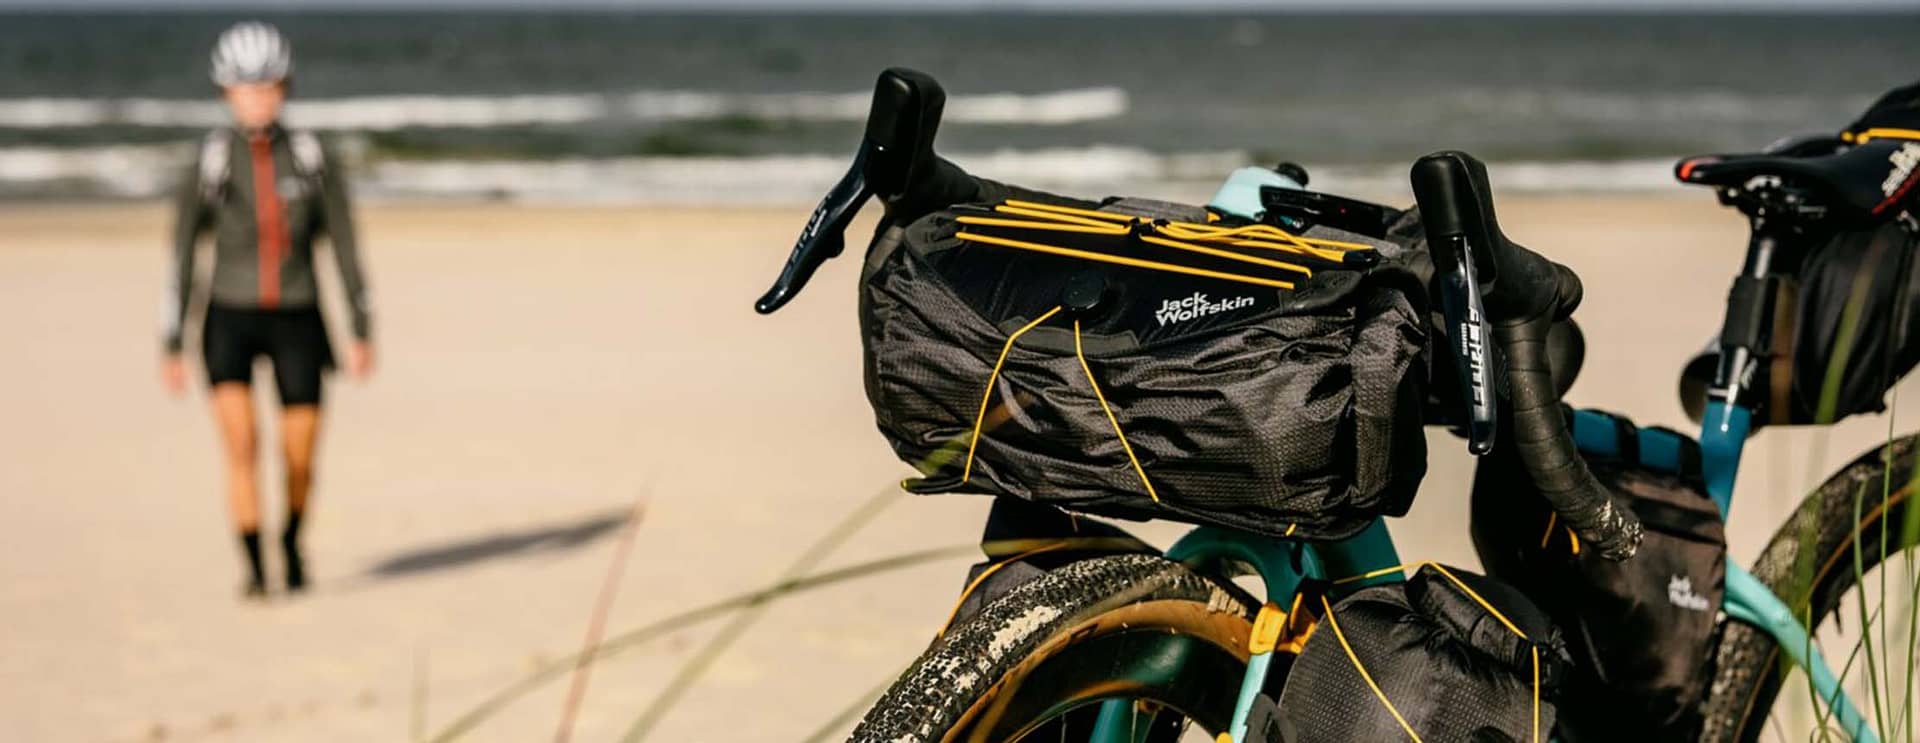 Ride Deeper, Discover More with Jack Wolfskin's 2023 Bikepacking Collection  - Sustain Health Magazine